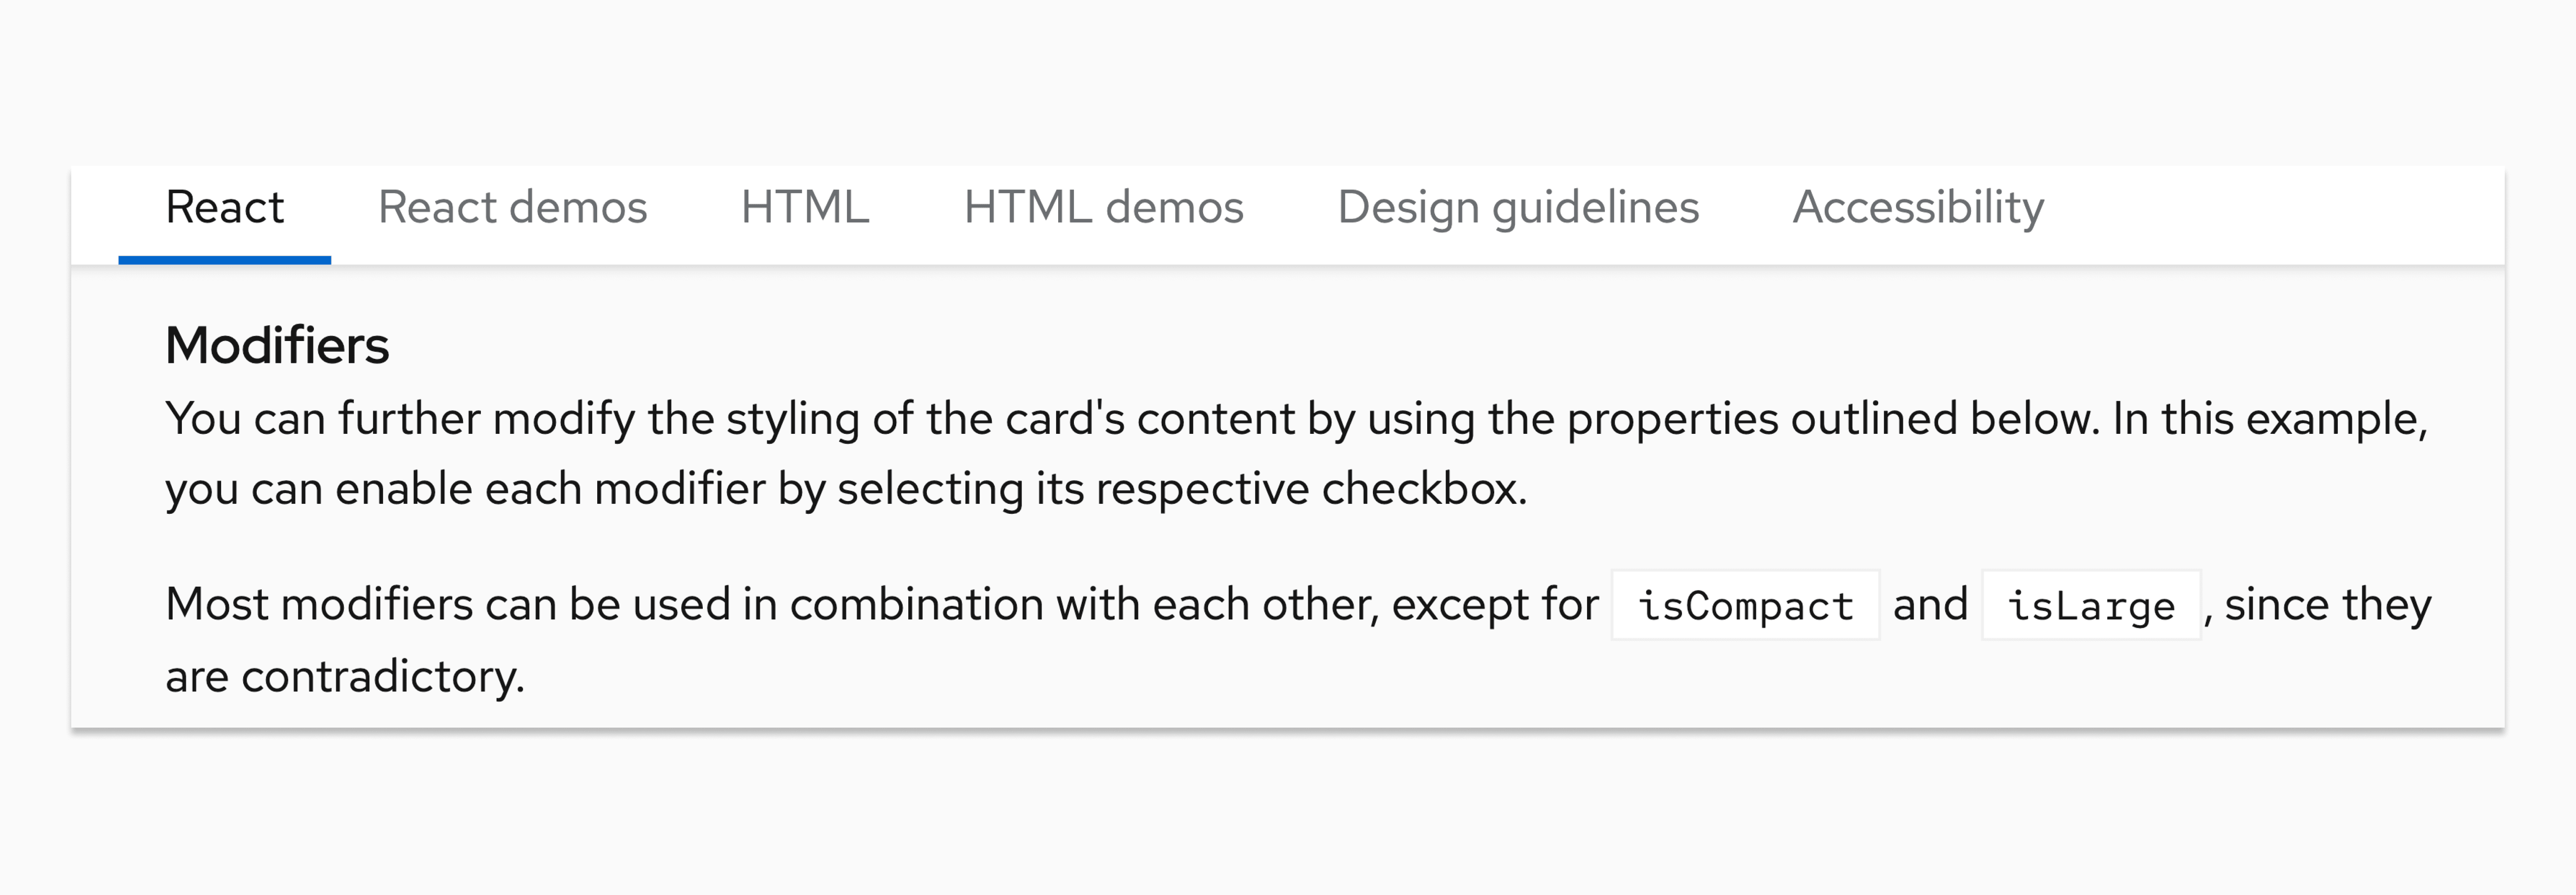 Component documentation showing sentence case copy and capitalization styling for code.